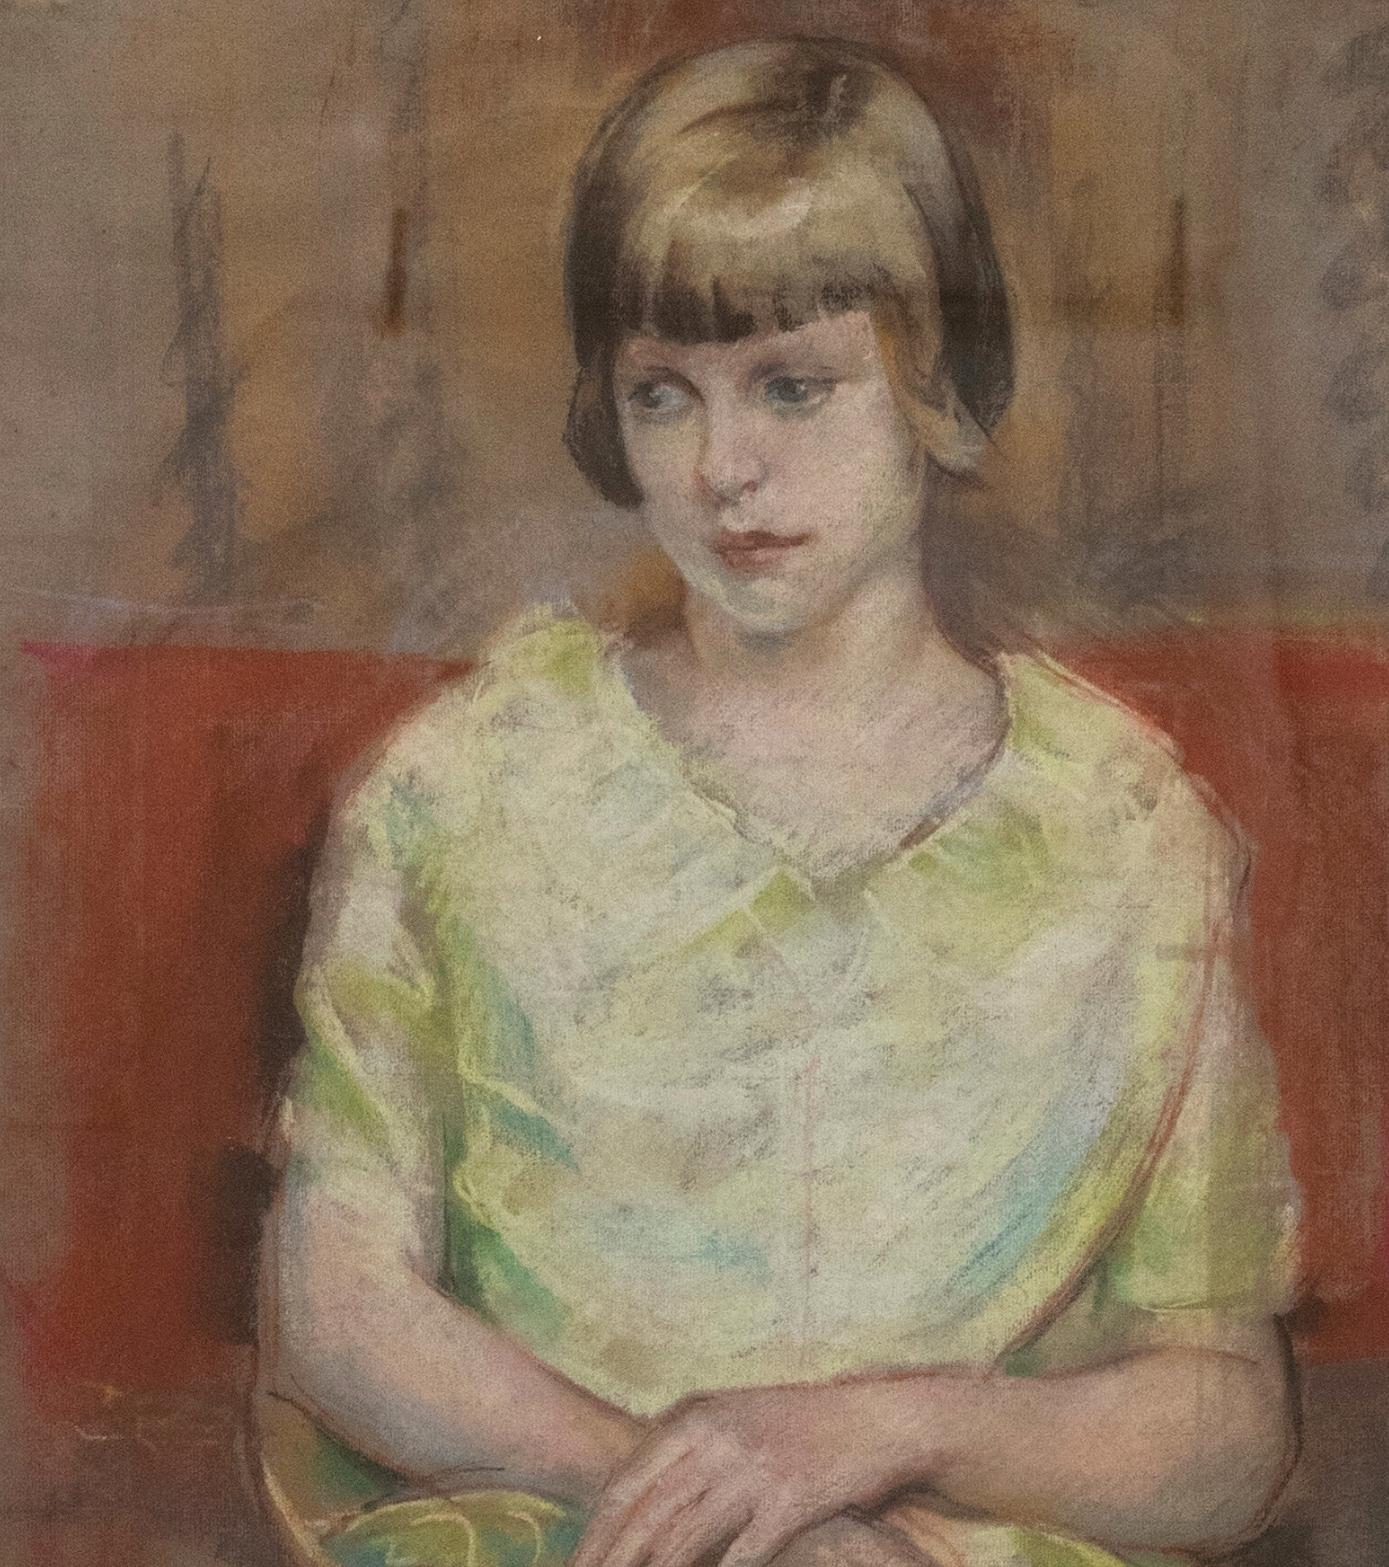 A charming portrait of a young girl with short cropped hair seated in a red chair. The artist captures her features and ruffled dress in expressive pastel markings, bringing vibrancy and movement to the composition. Artist name inscribed to to the